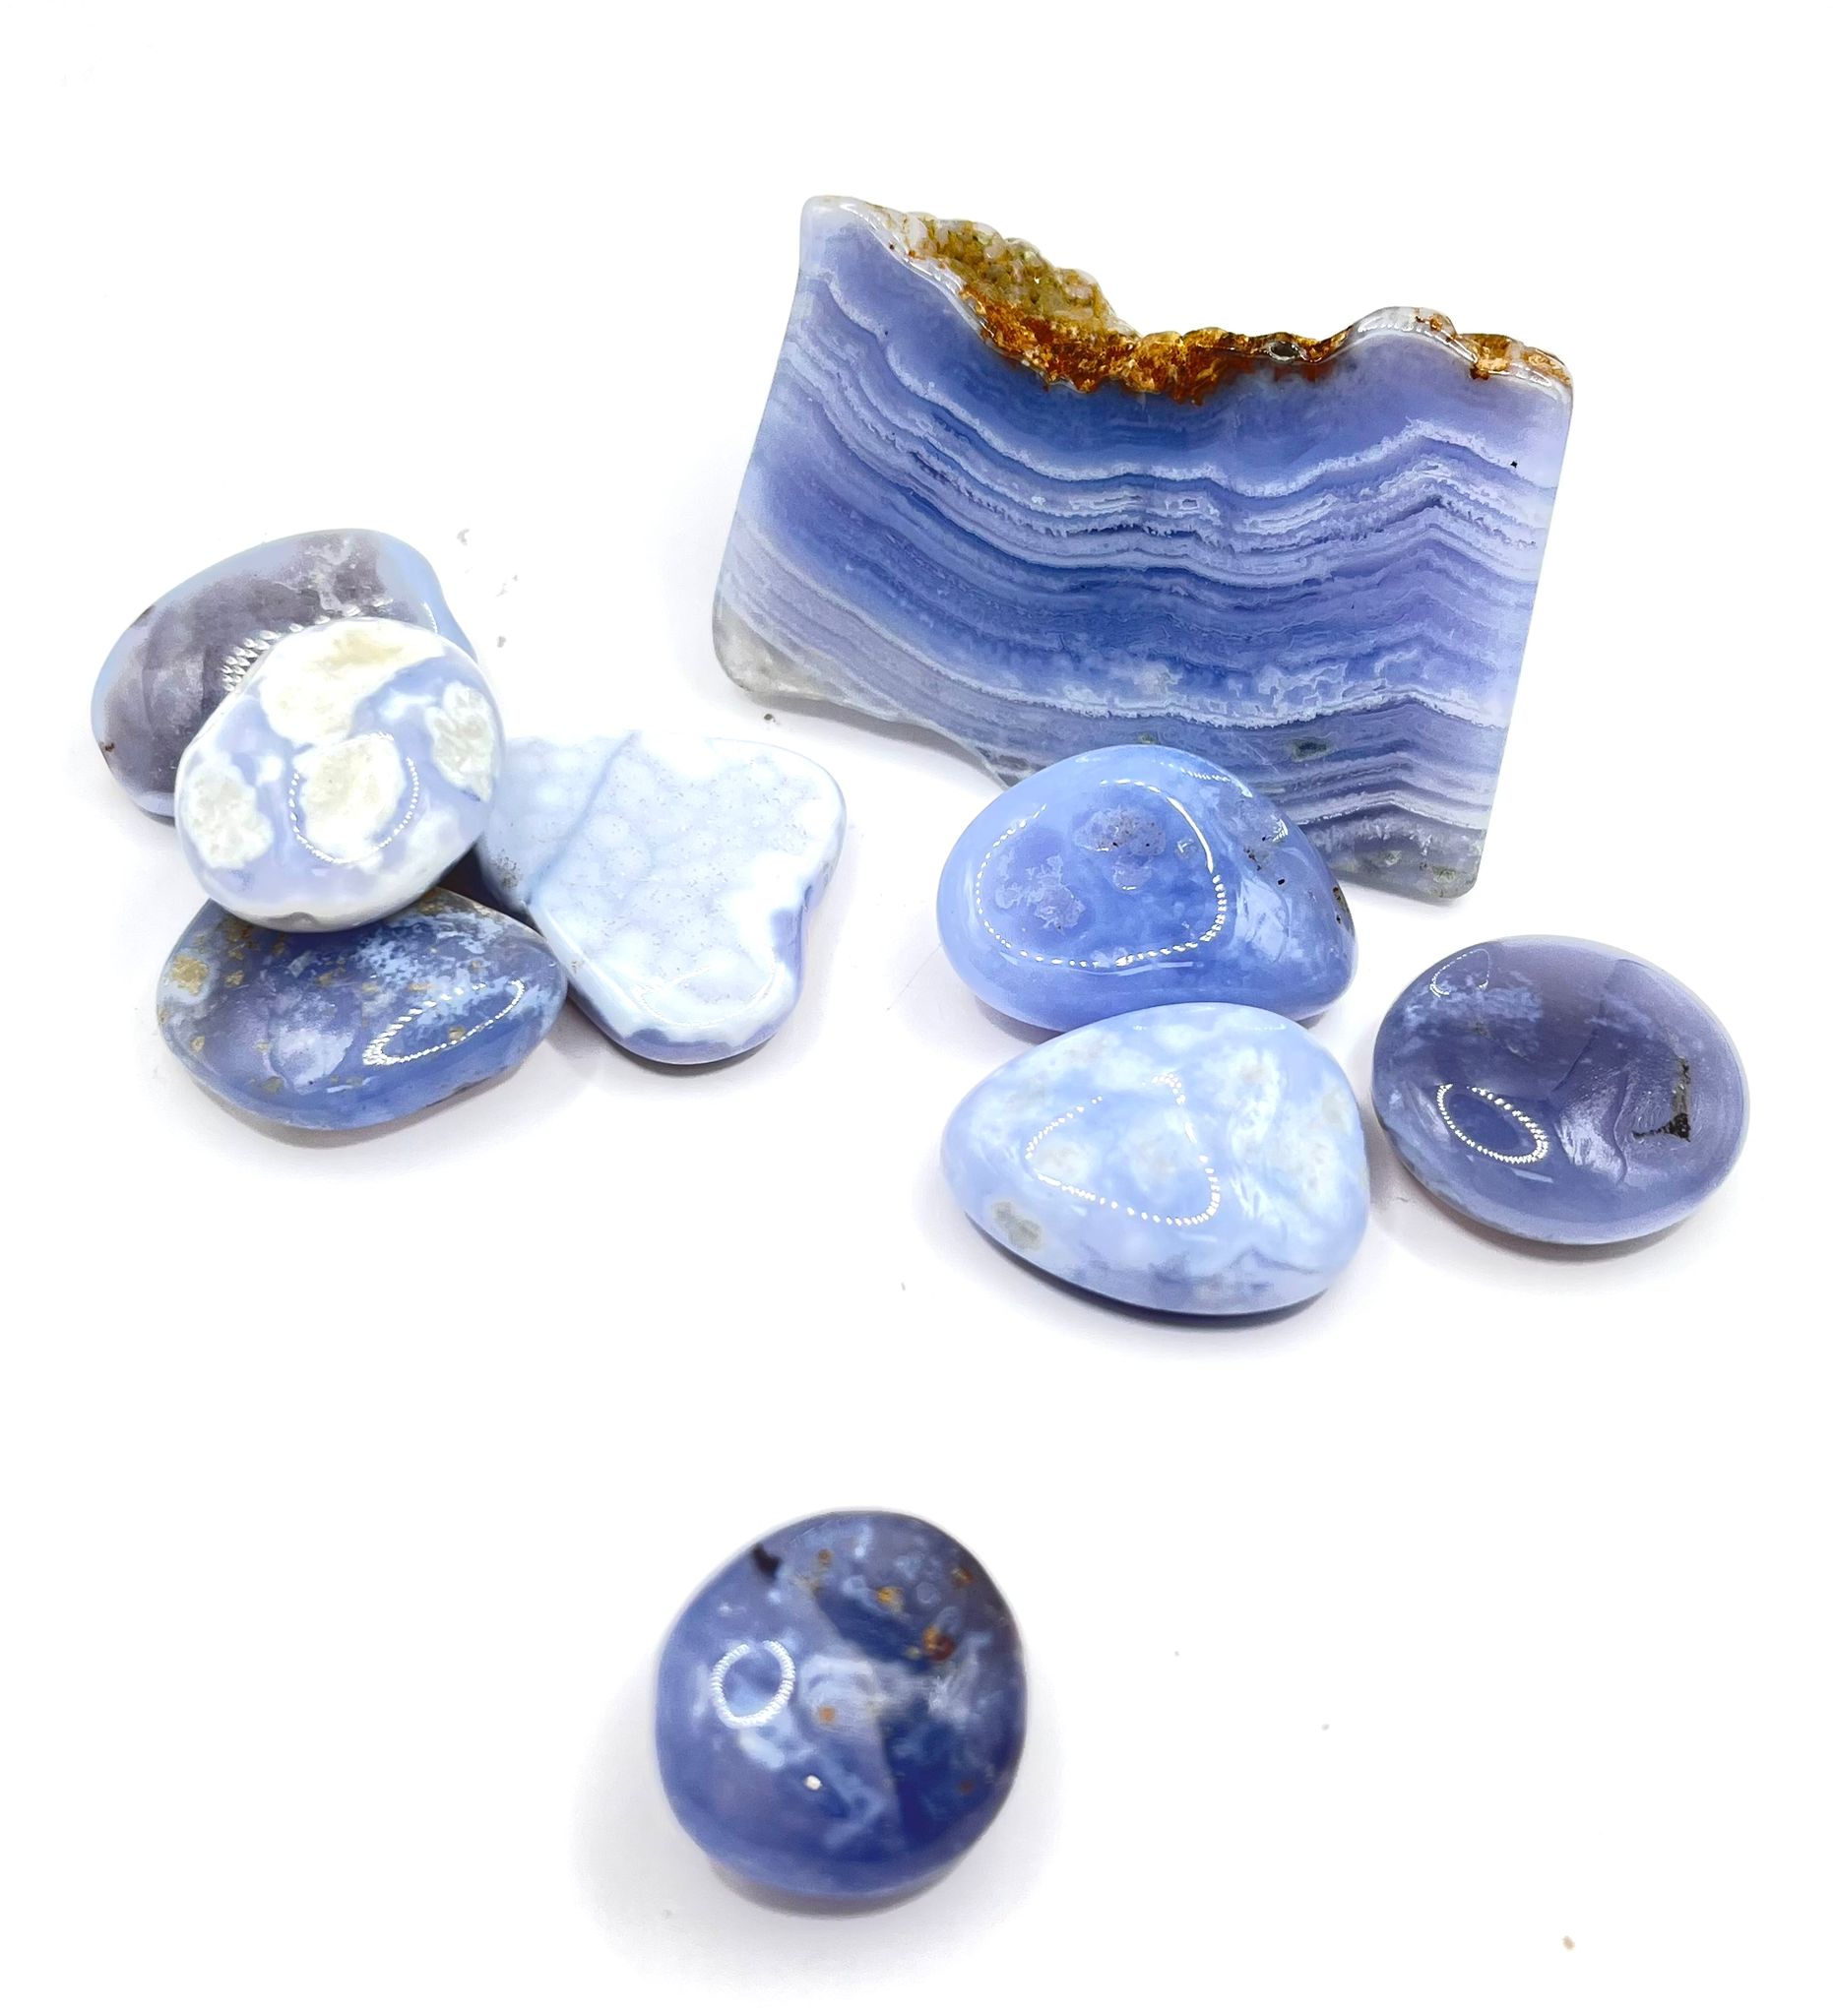 Agate and chalcedony